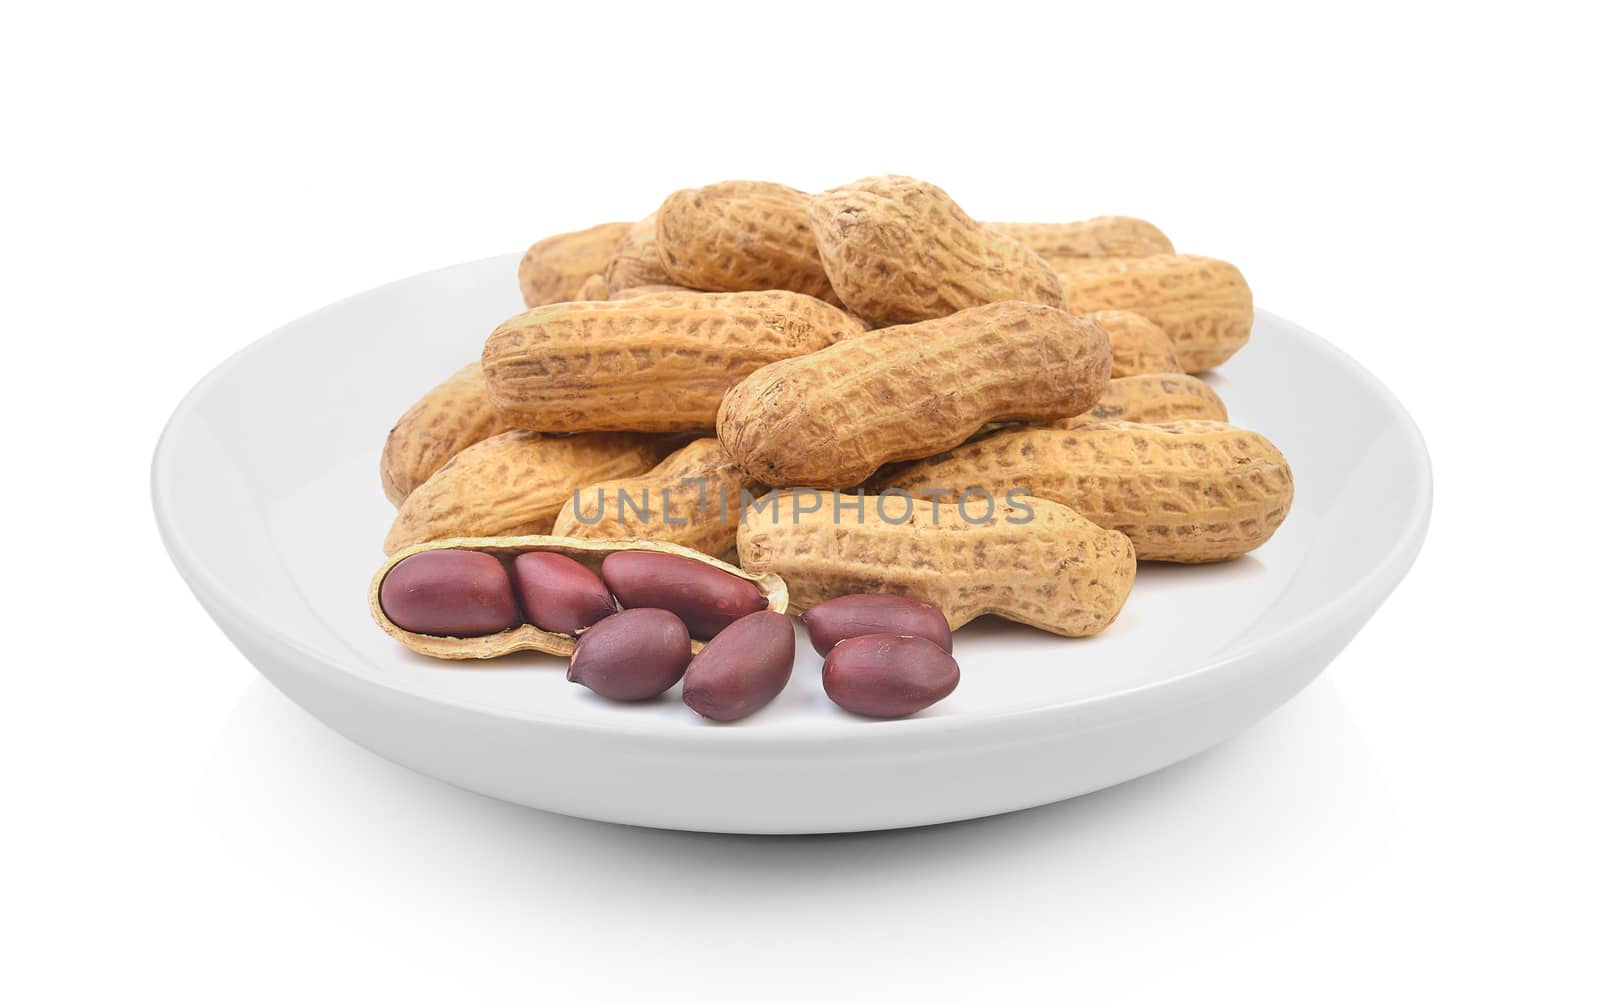 peanuts in plate on white background by sommai